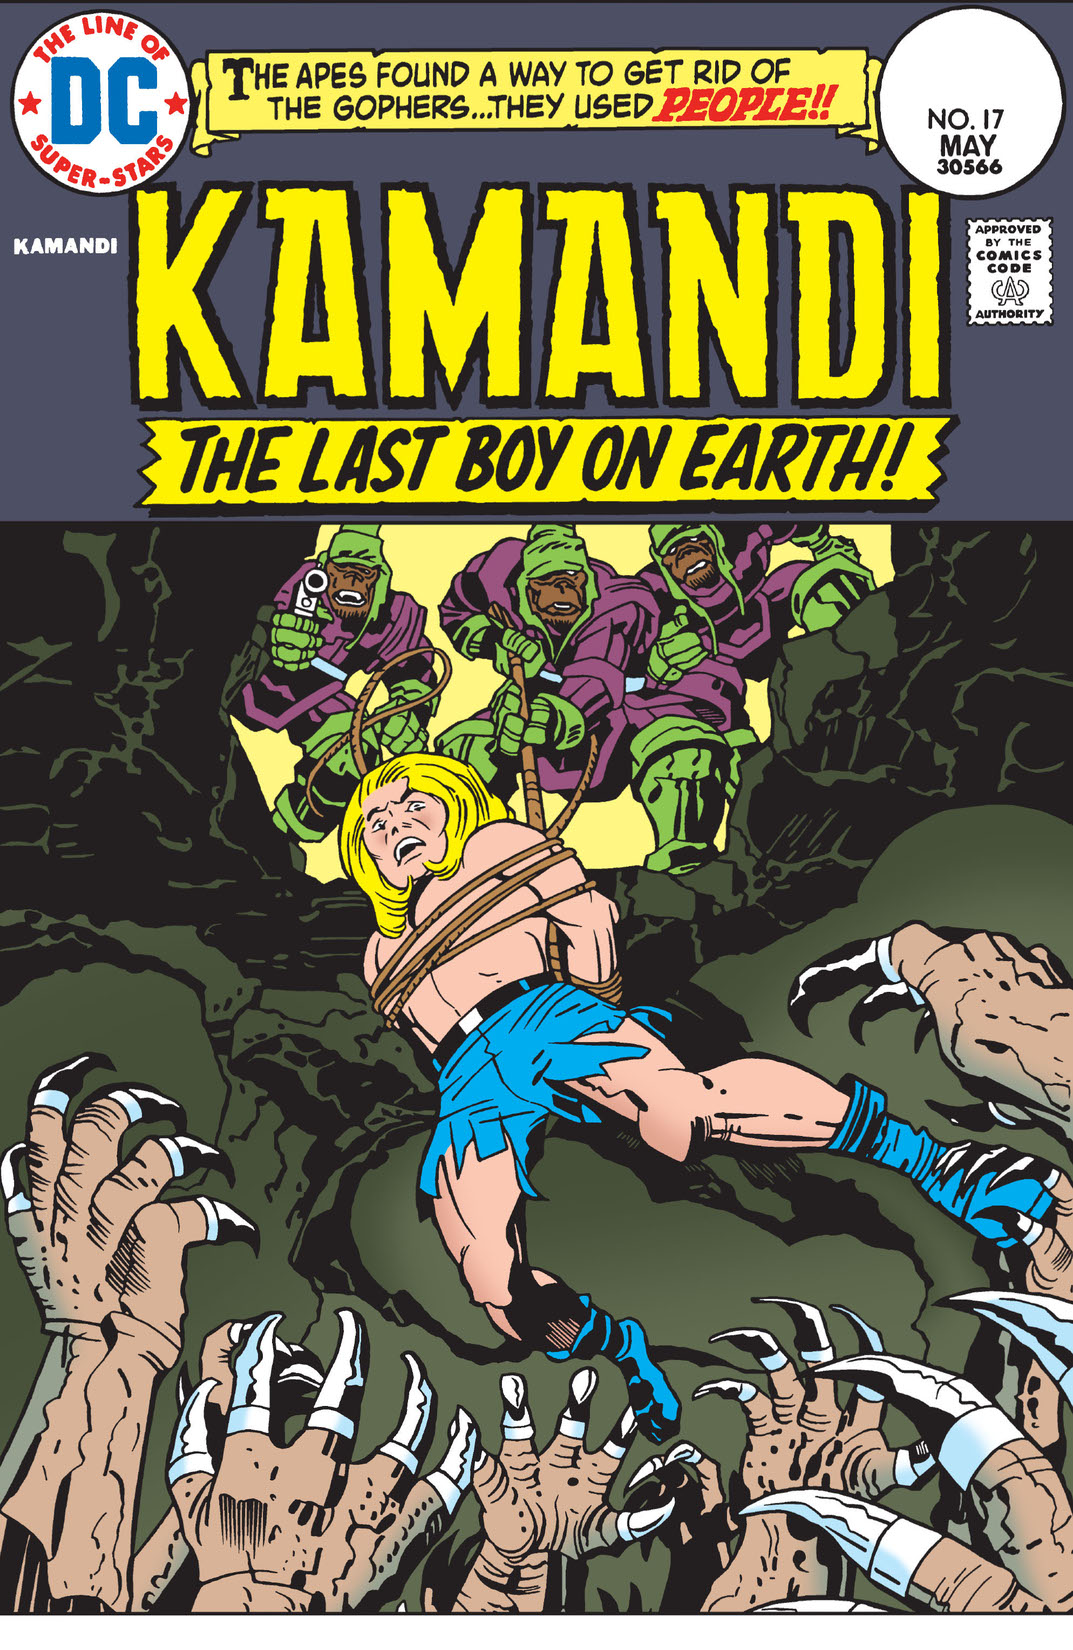 Kamandi: The Last Boy on Earth #17 preview images